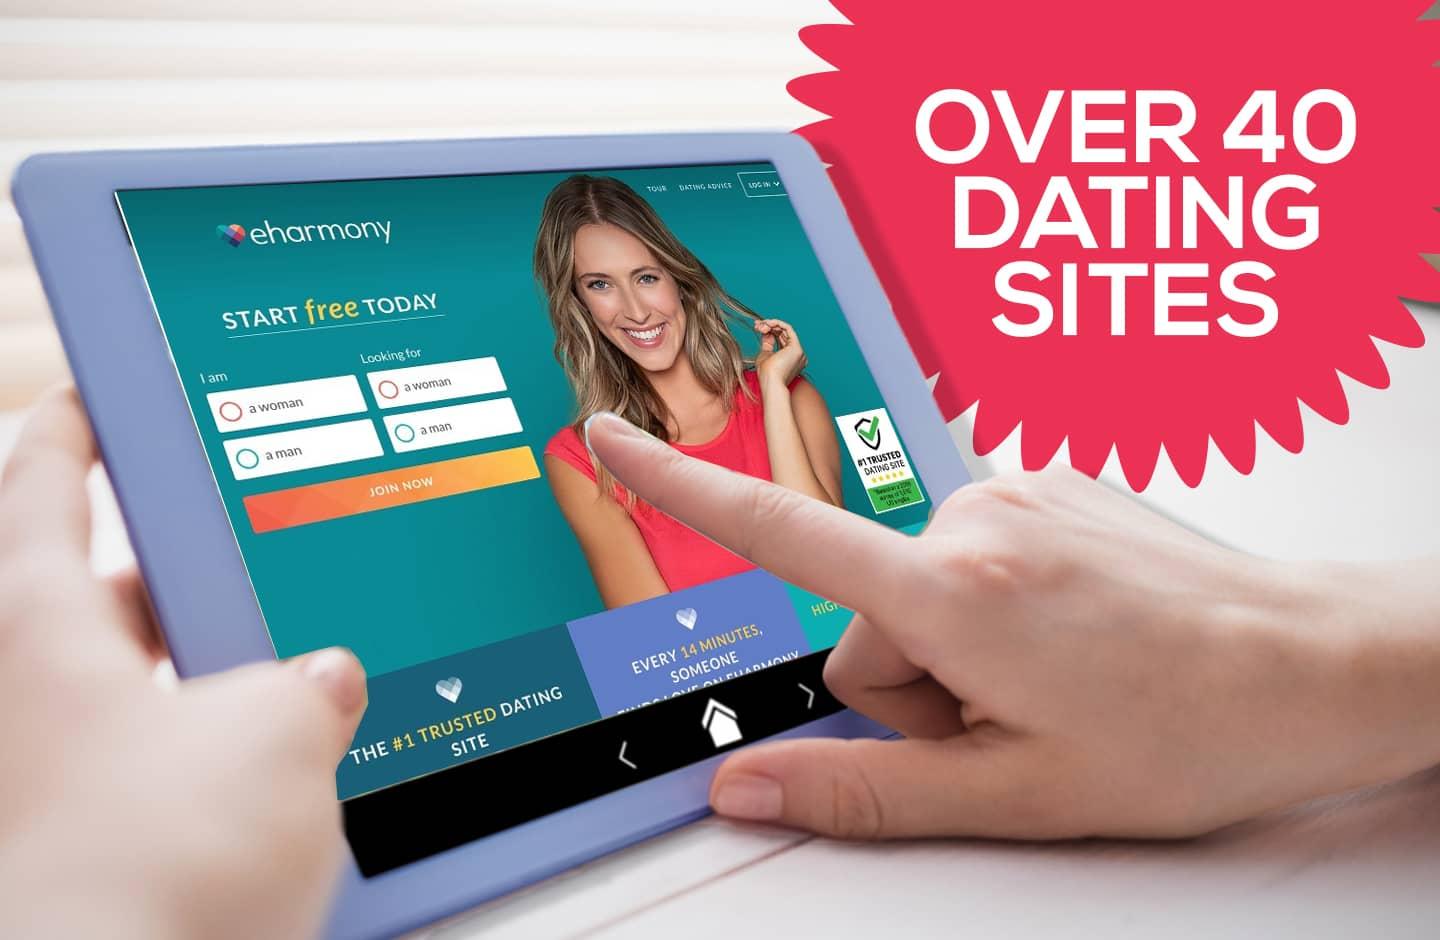 8 Best Over 40 Dating Sites We Did The Research For photo